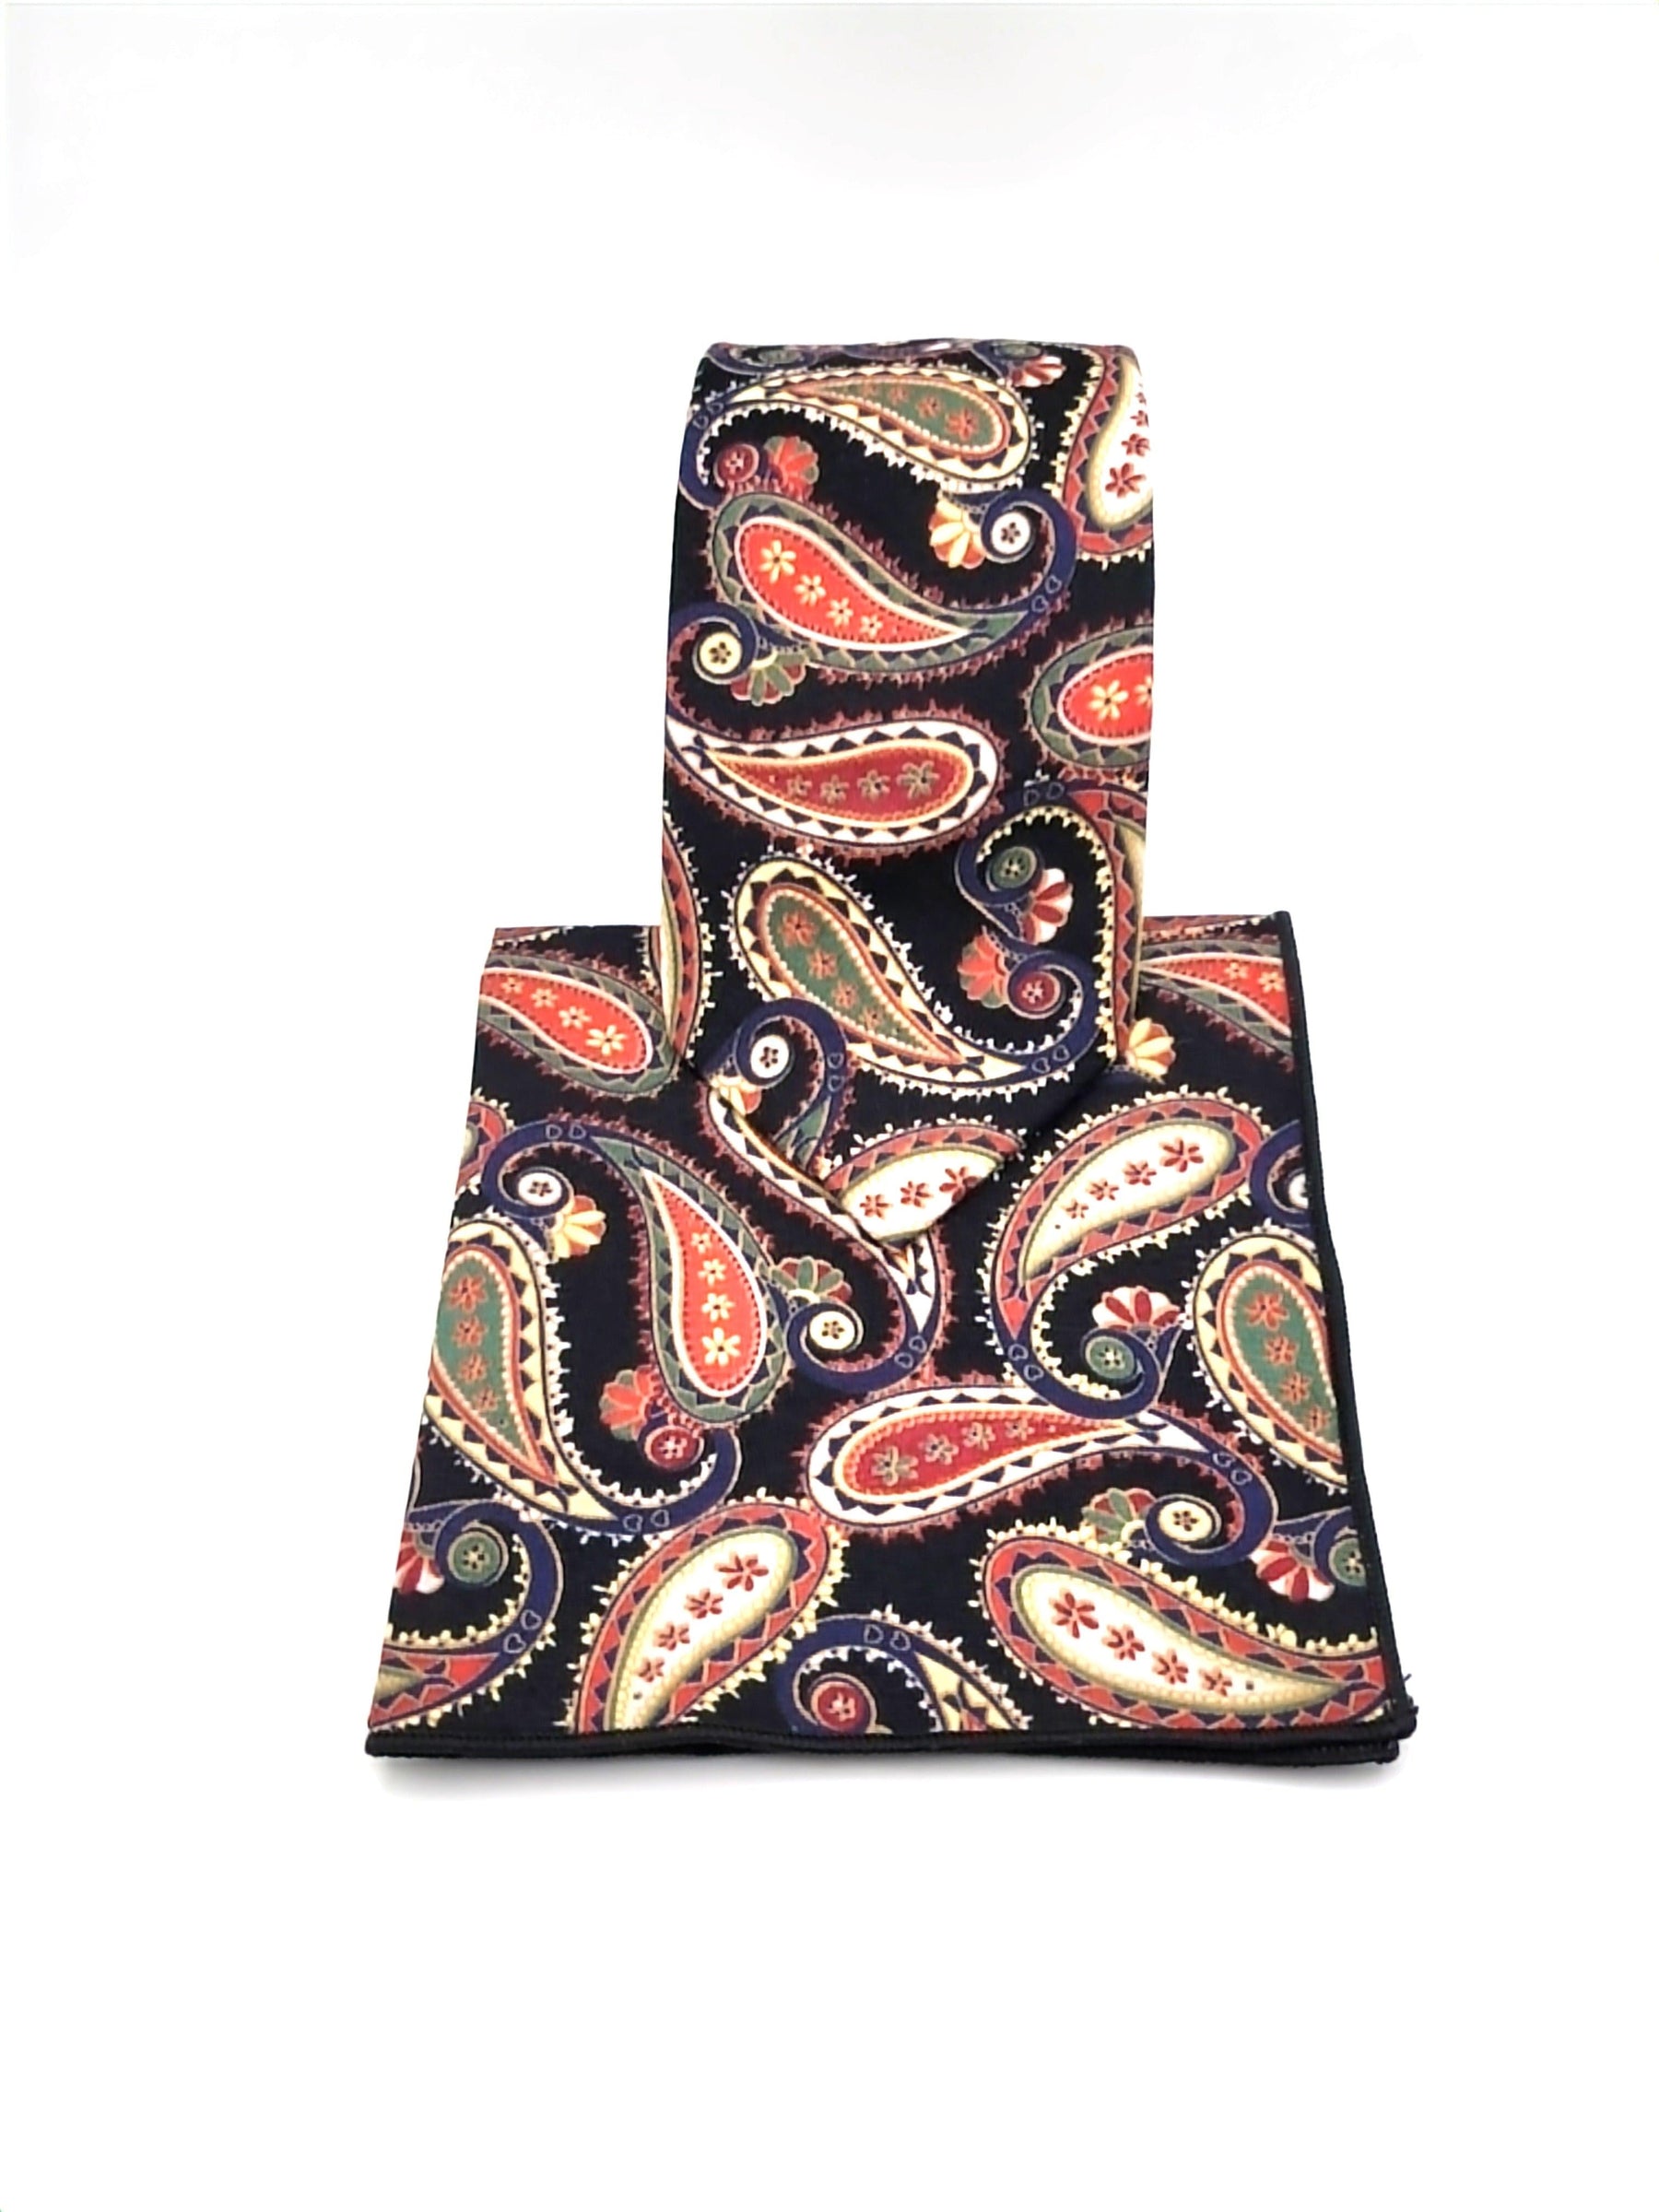 Black and Red Paisley Necktie and Pocket Square - The Upscale Banker